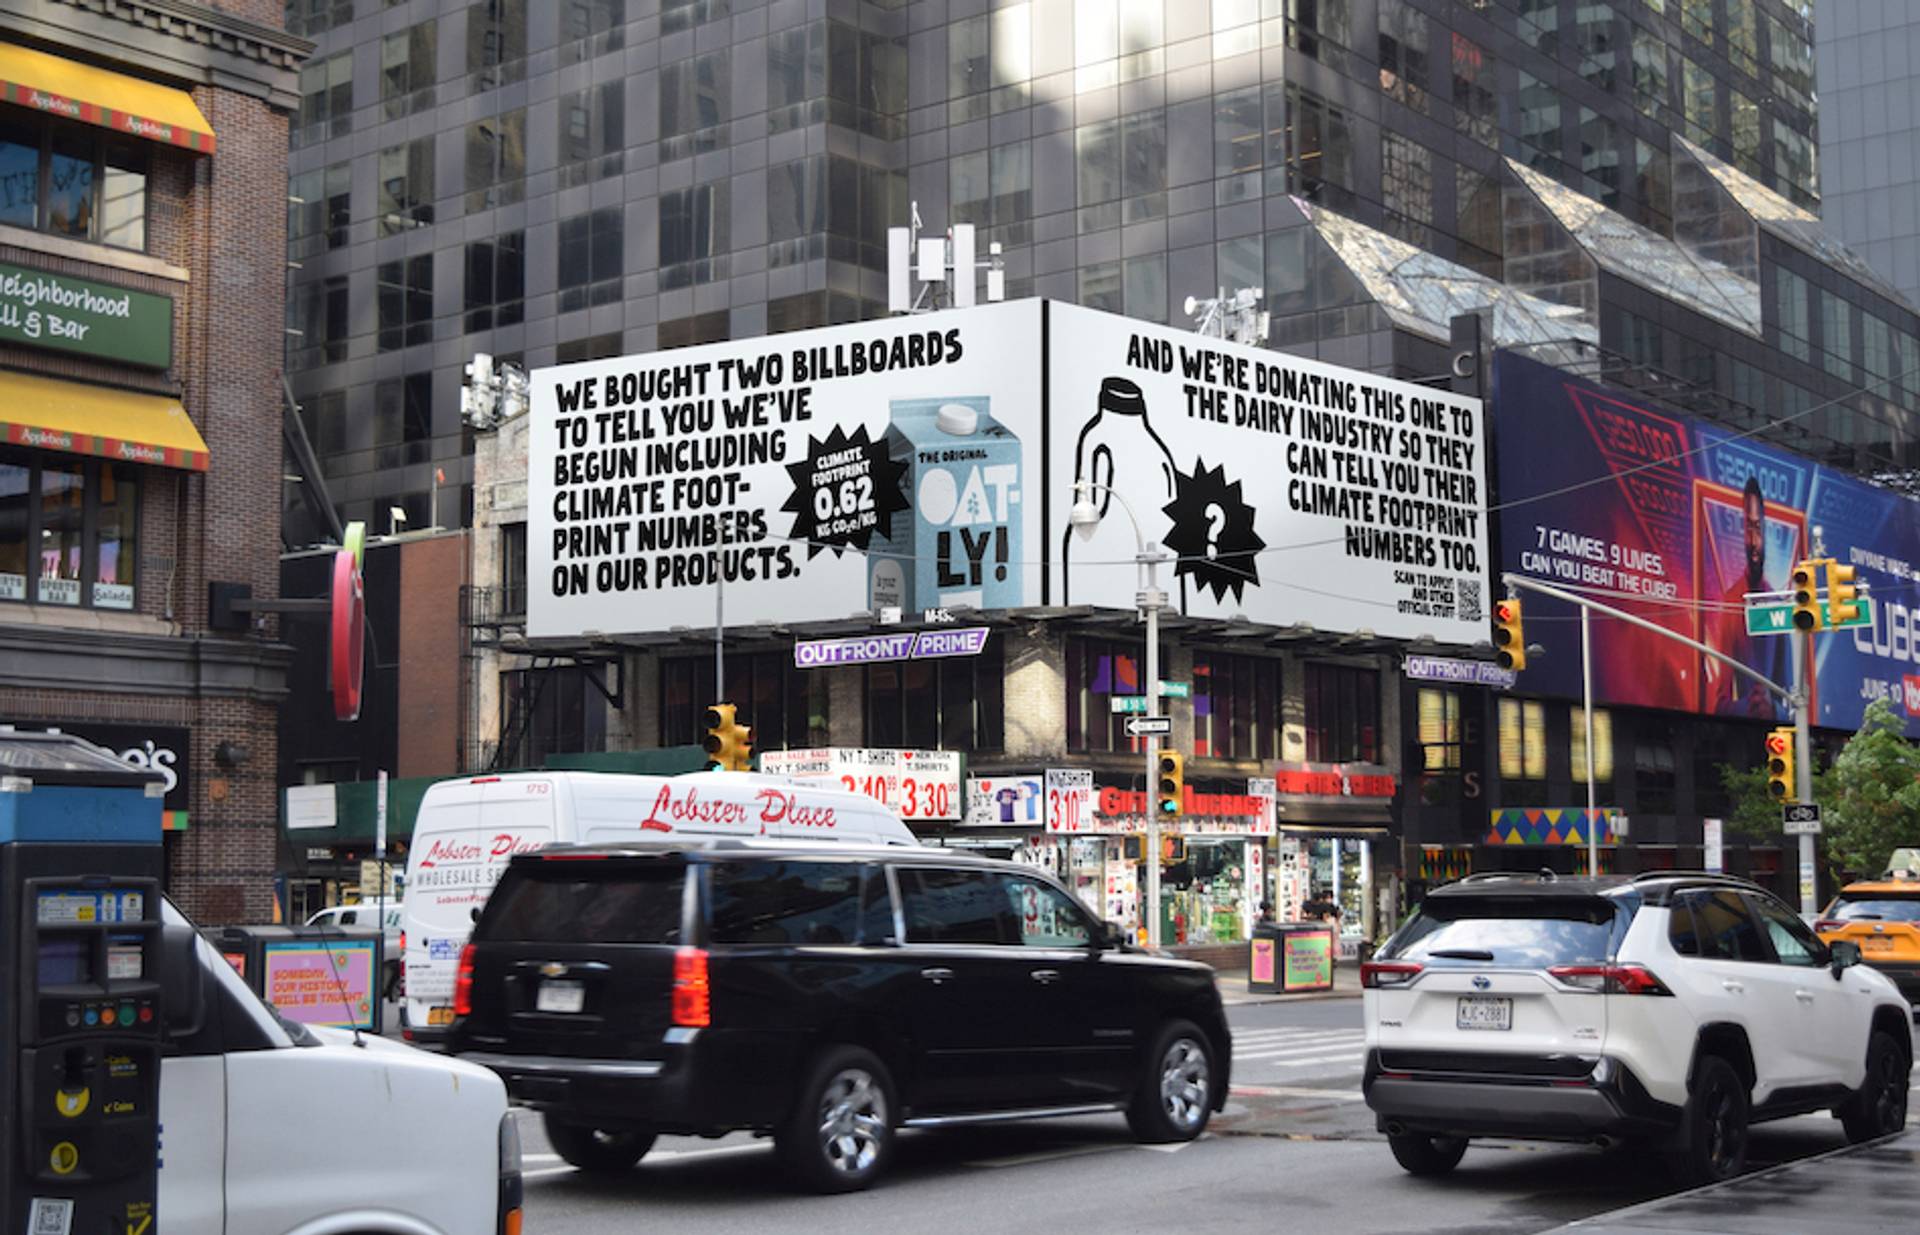 Oatly trolls competition with climate billboards